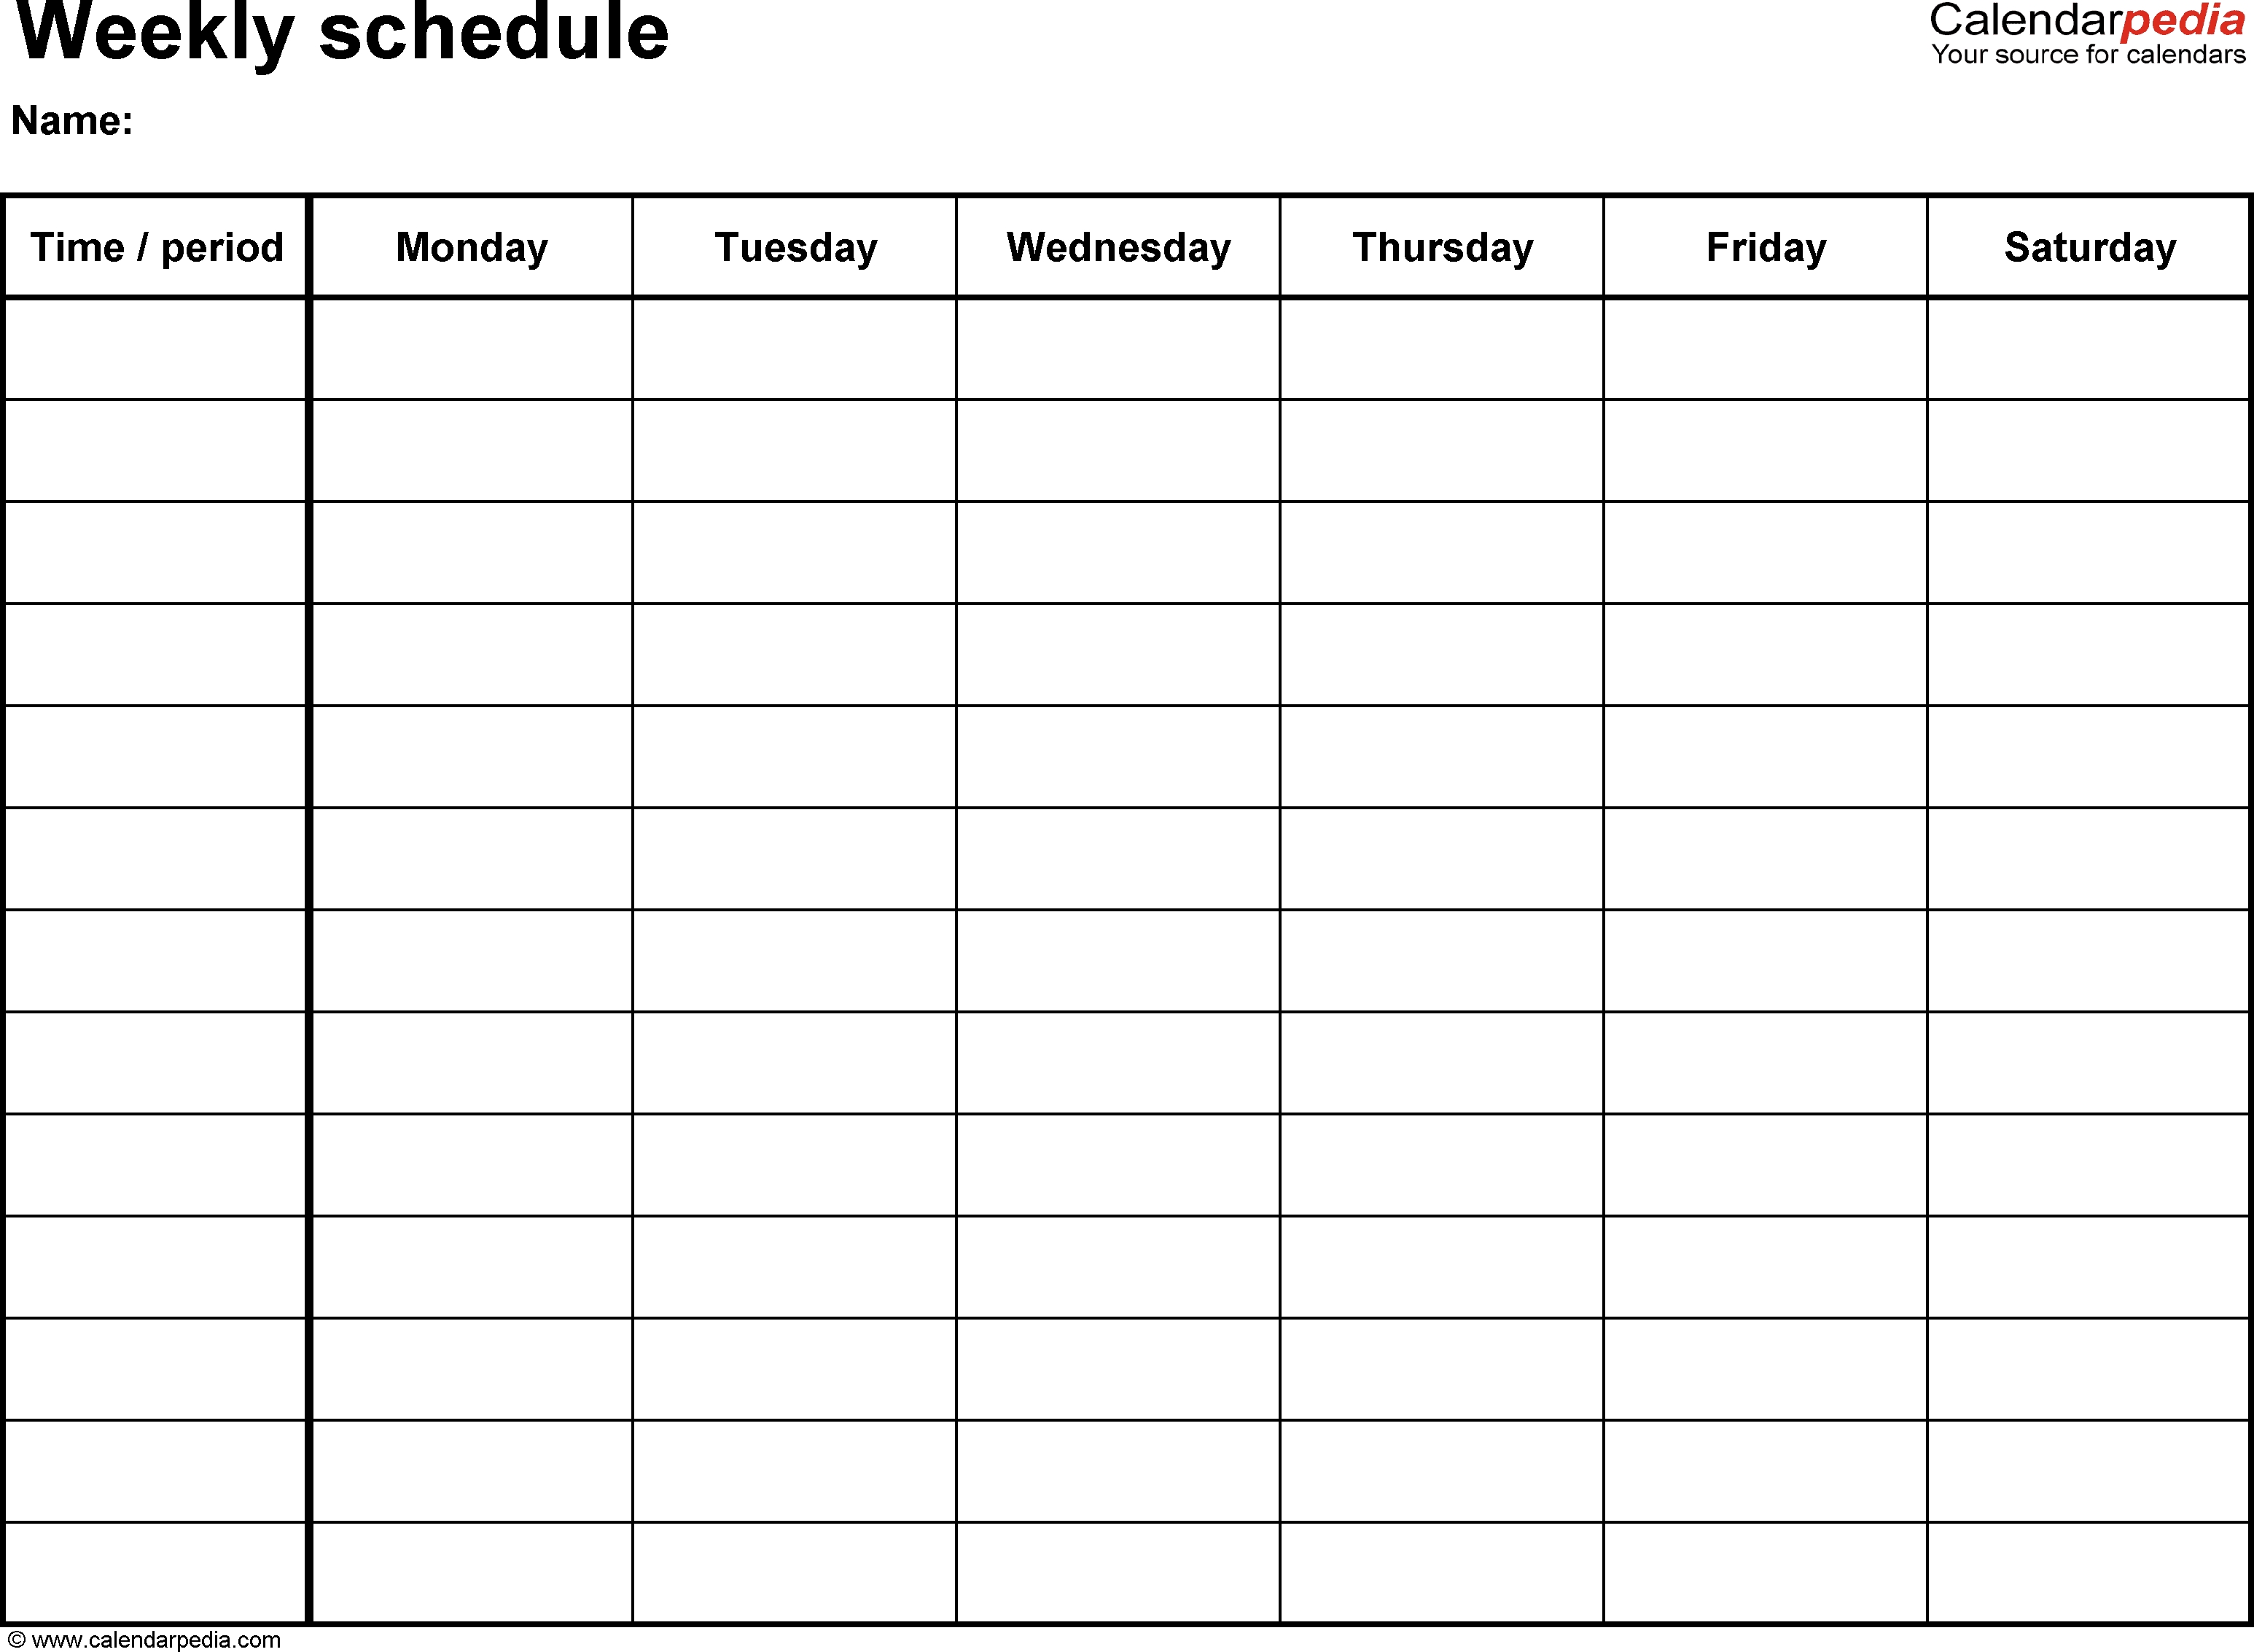 Free Weekly Schedule Templates For Word - 18 Templates with 5 Day Calendar Microsoft Word